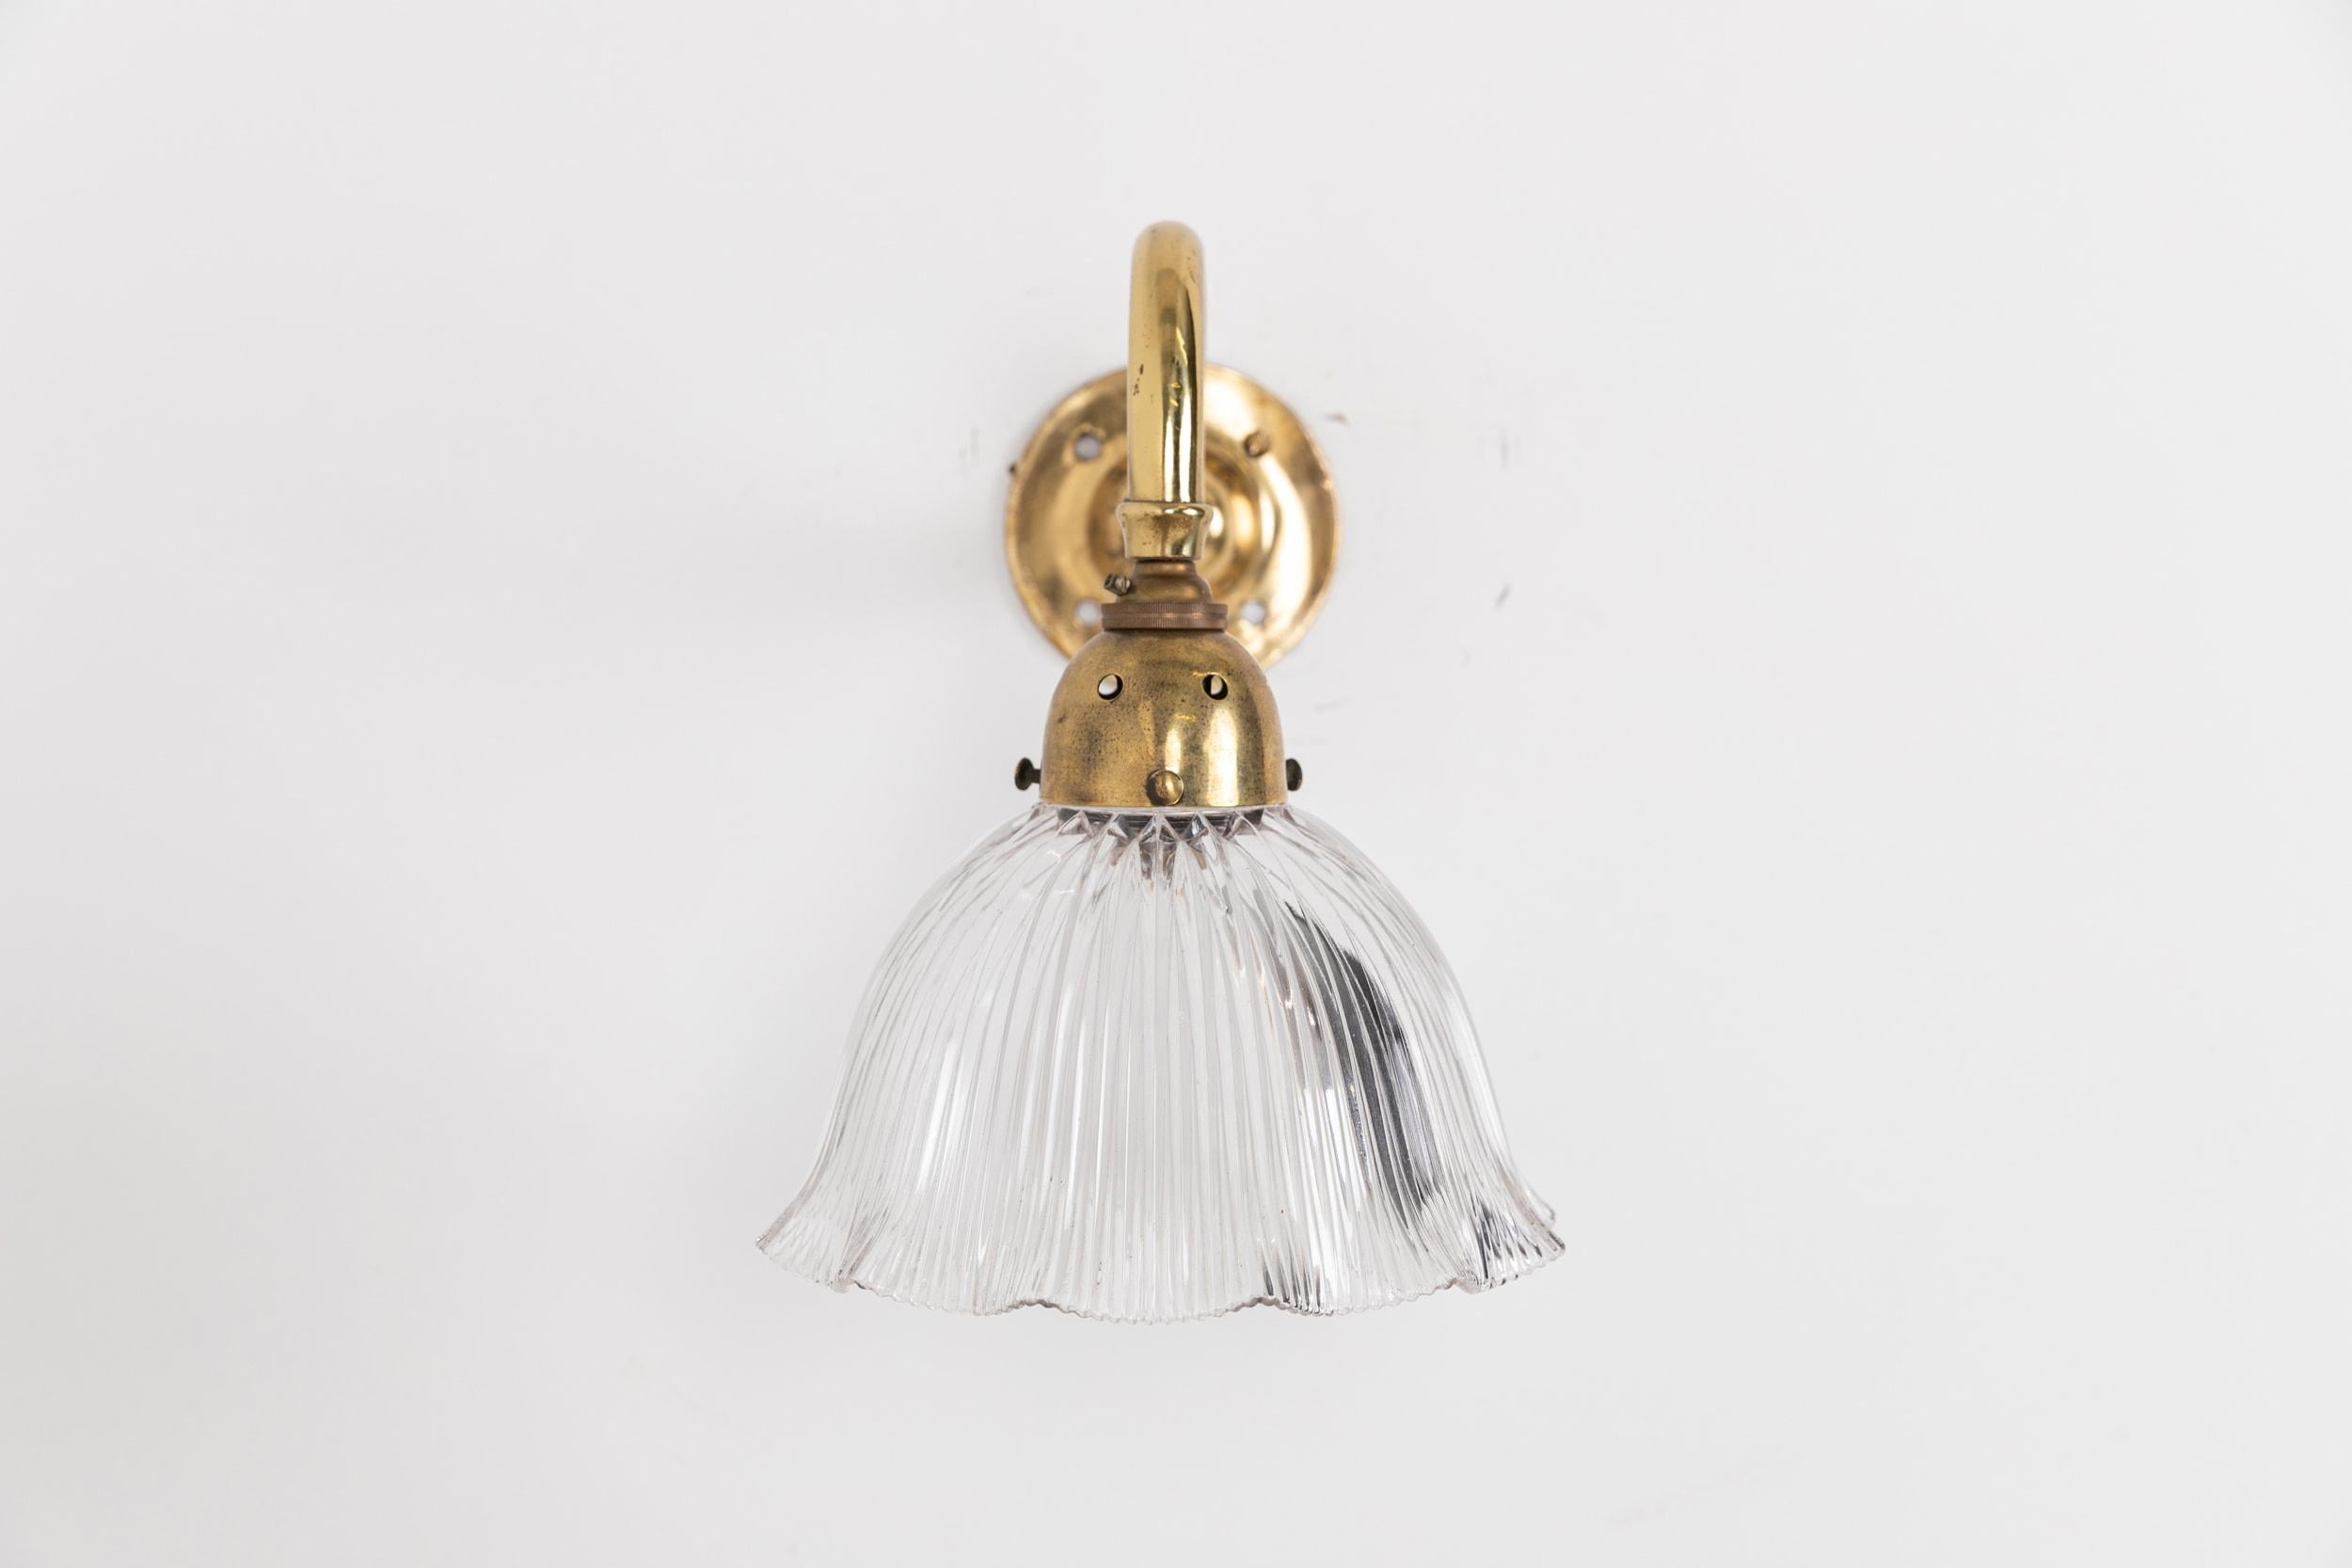 Pressed Antique Holophane 'Stiletto' Prismatic Glass Brass Swan Neck Wall Lamp, c.1920